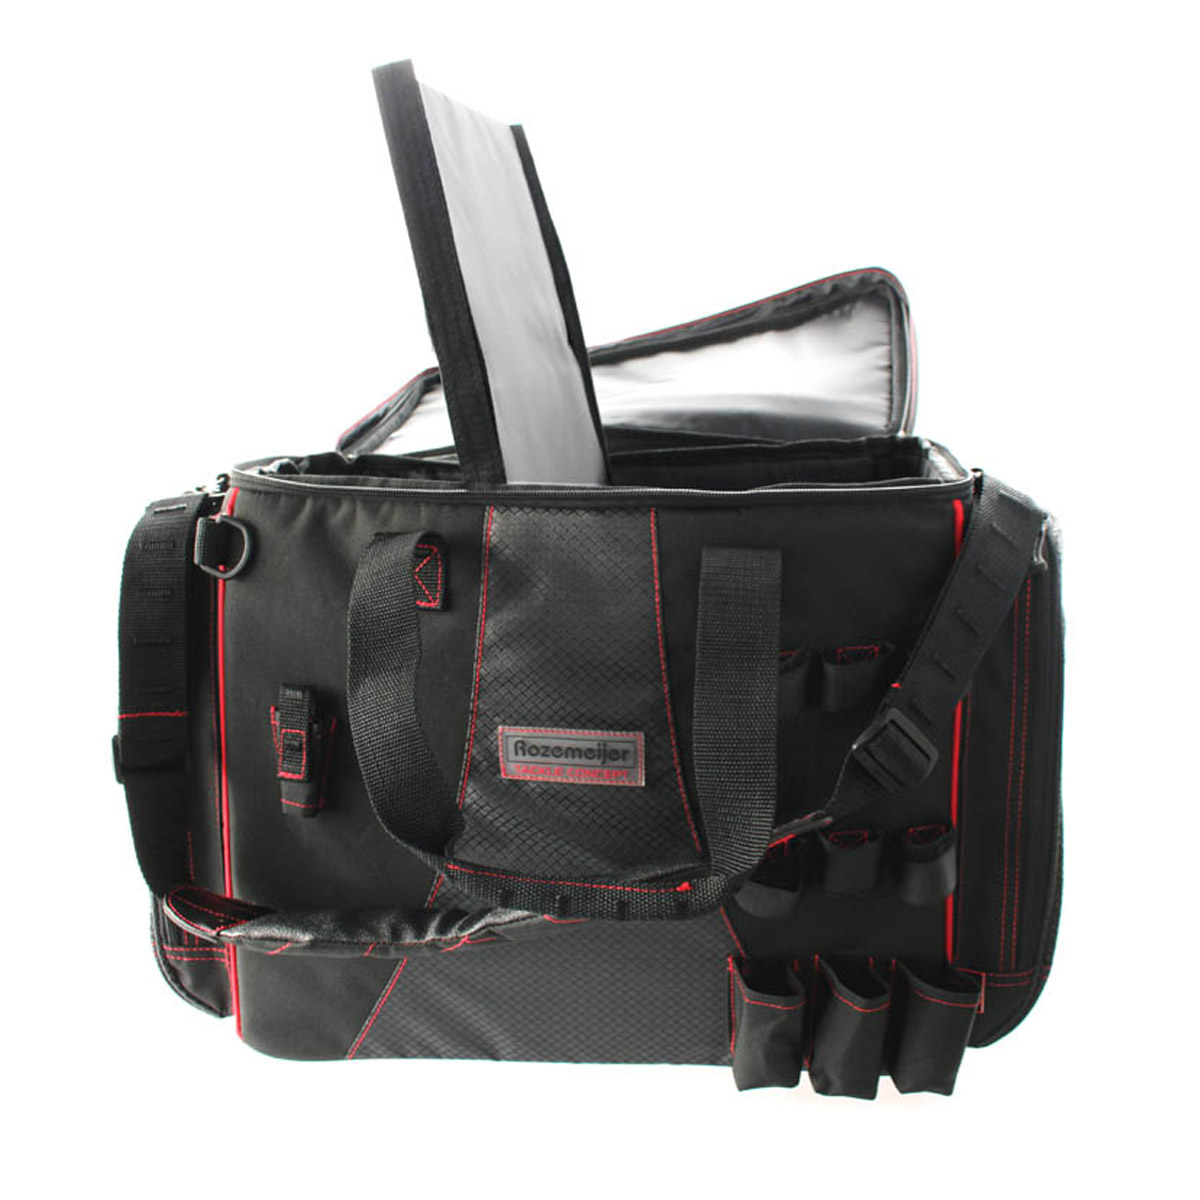 Rozemeijer Tackle Concept Large Carryall